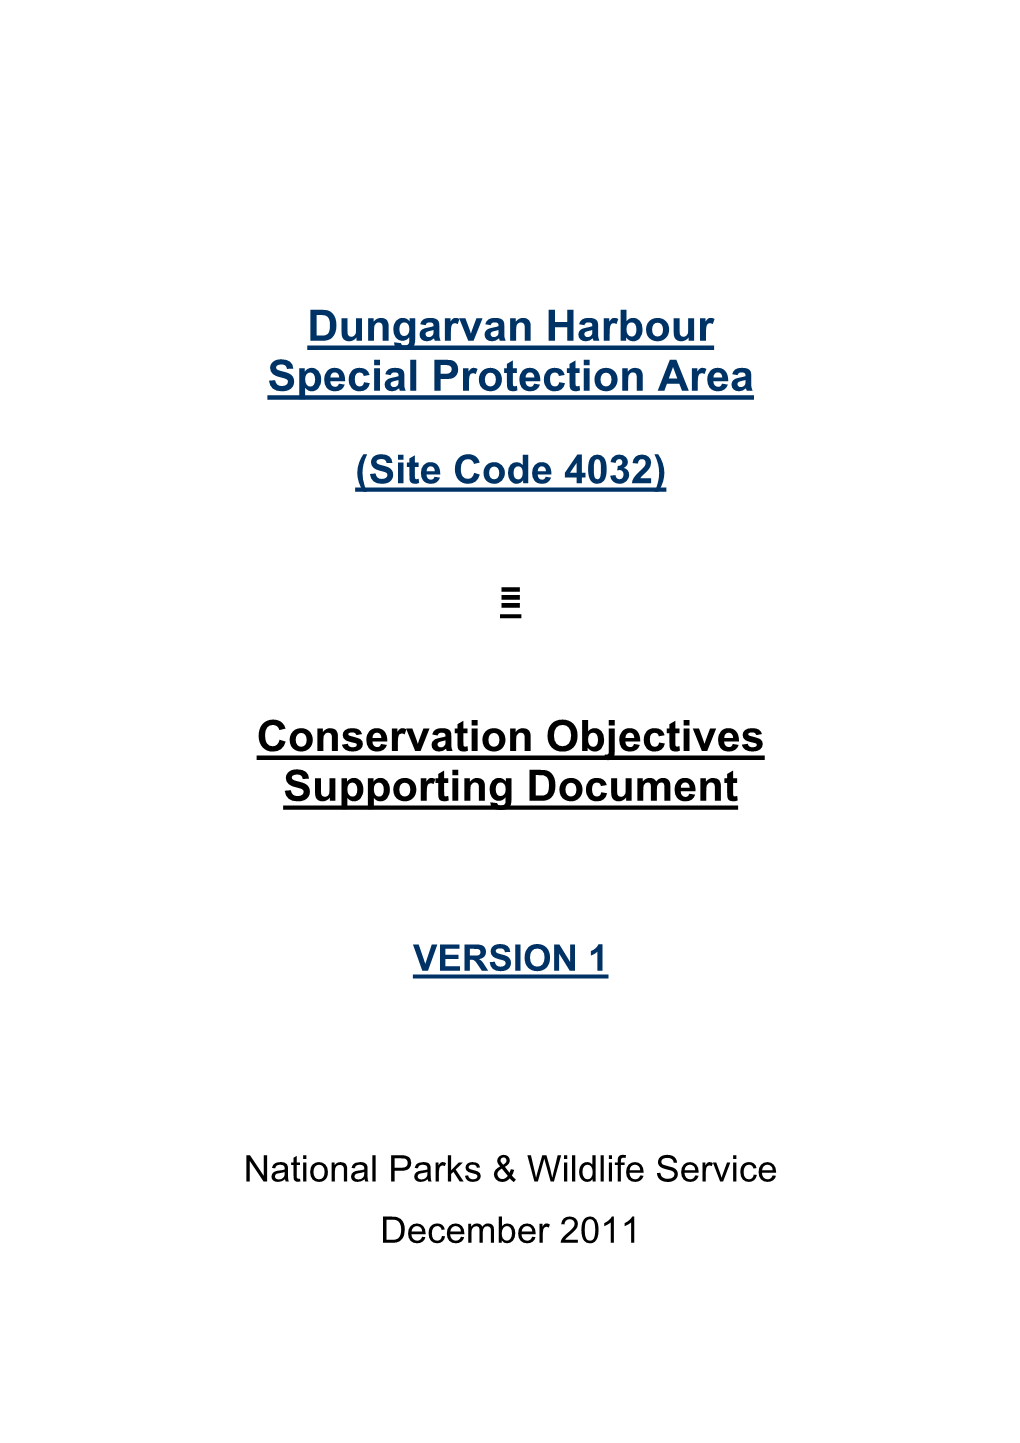 Dungarvan Harbour Special Protection Area